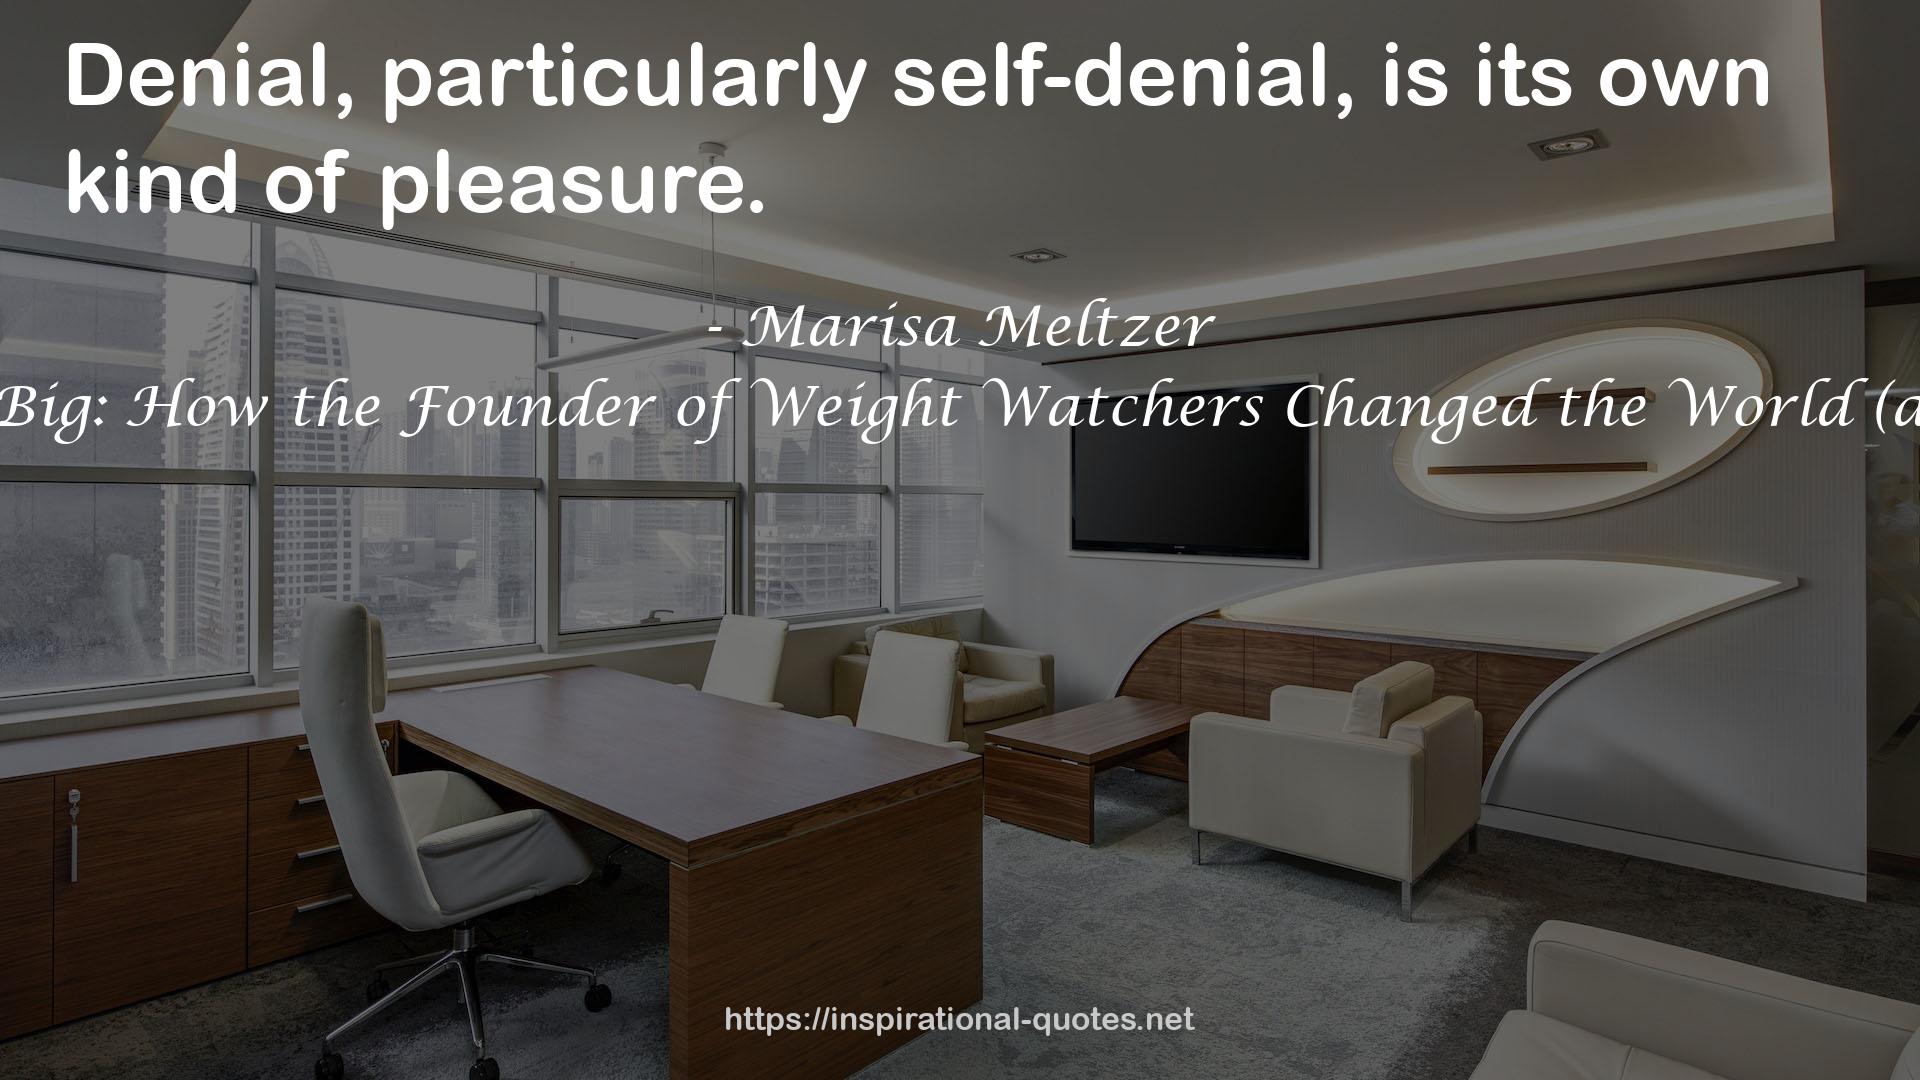 This Is Big: How the Founder of Weight Watchers Changed the World (and Me) QUOTES